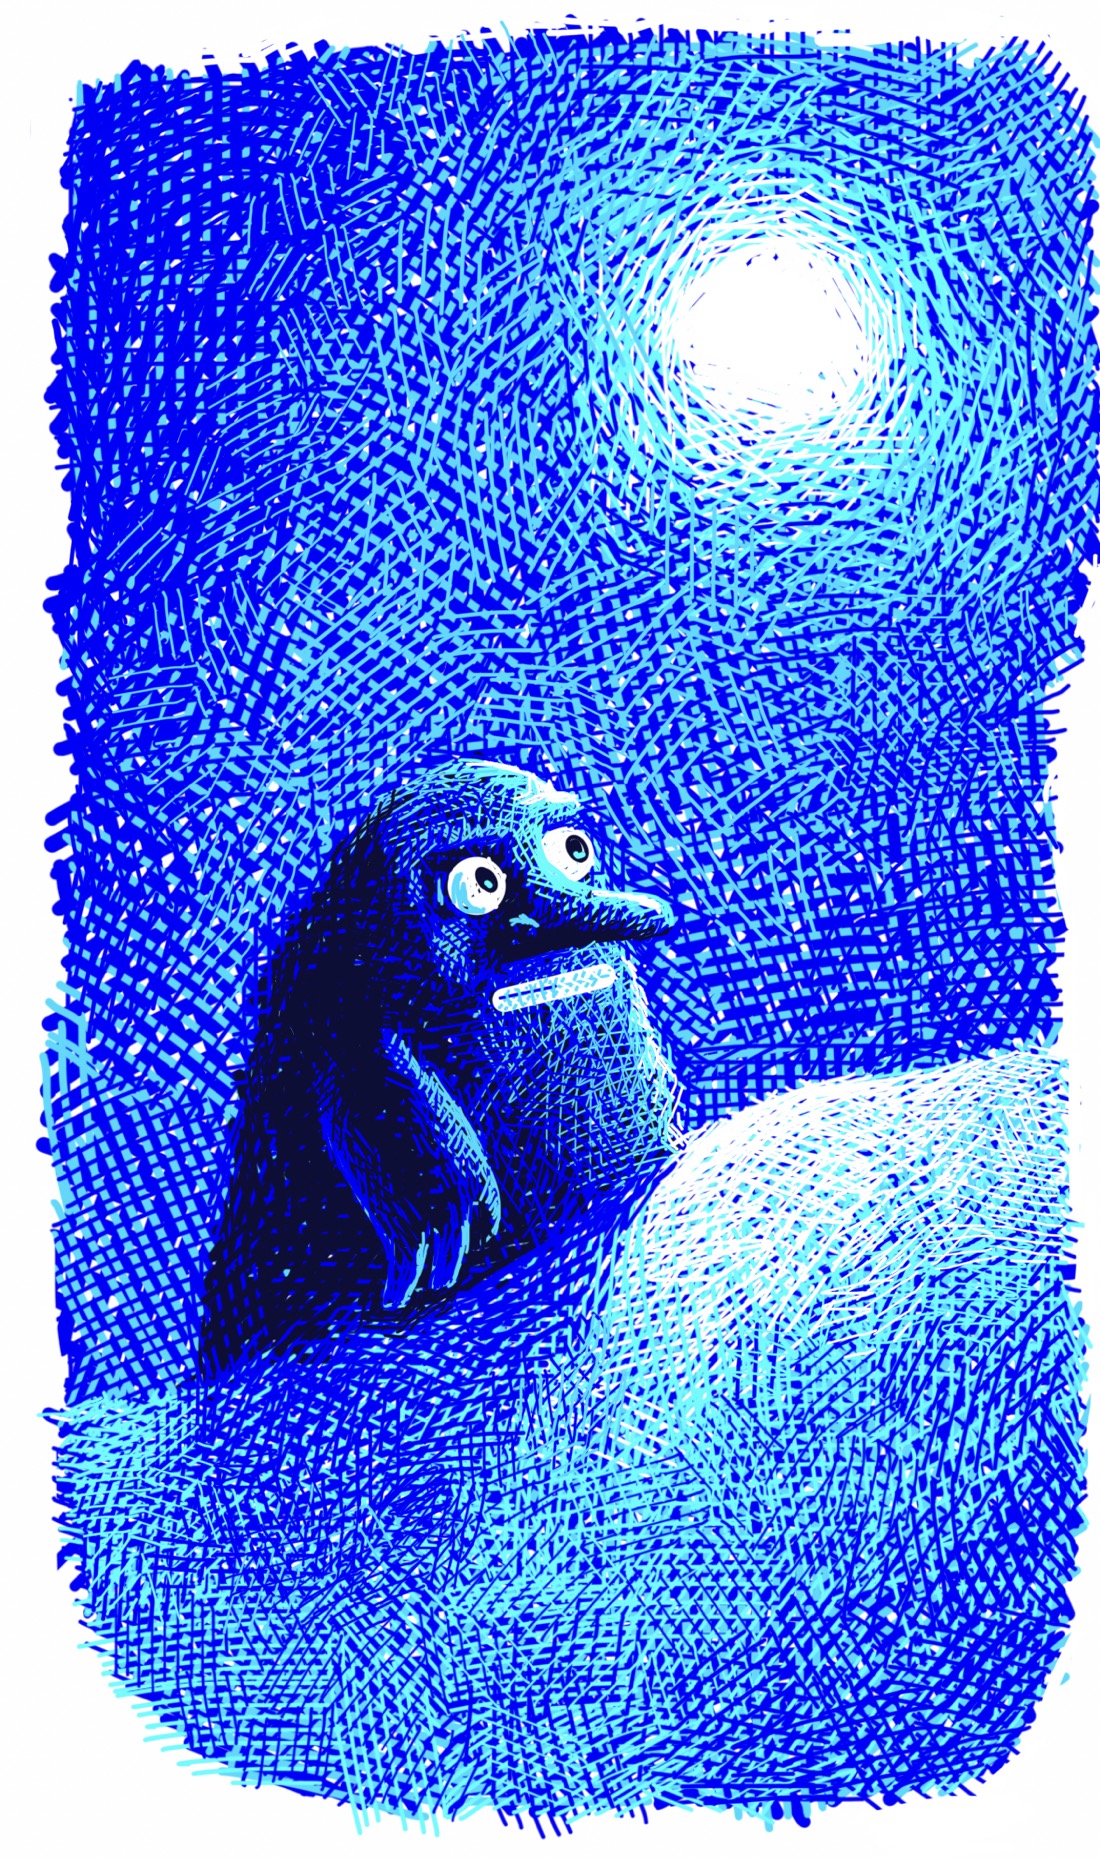 A hillside, gleaming in the moonlight, possibly covered with snow. In the sky sits a blazing full moon. The whole scene is blue. Cast sharply in the moonlight, moving up the side of the hill, is a shapeless lump of a figure: a troll-like creature with large paws, a heavy brow, a long nose, and white, staring eyes. It appears to be transfixed by the full moon. This, for anyone who is familiar with Tove Jansson's Moominland series, is the Groke: out and about on a night when no one but the Groke would be stirring.